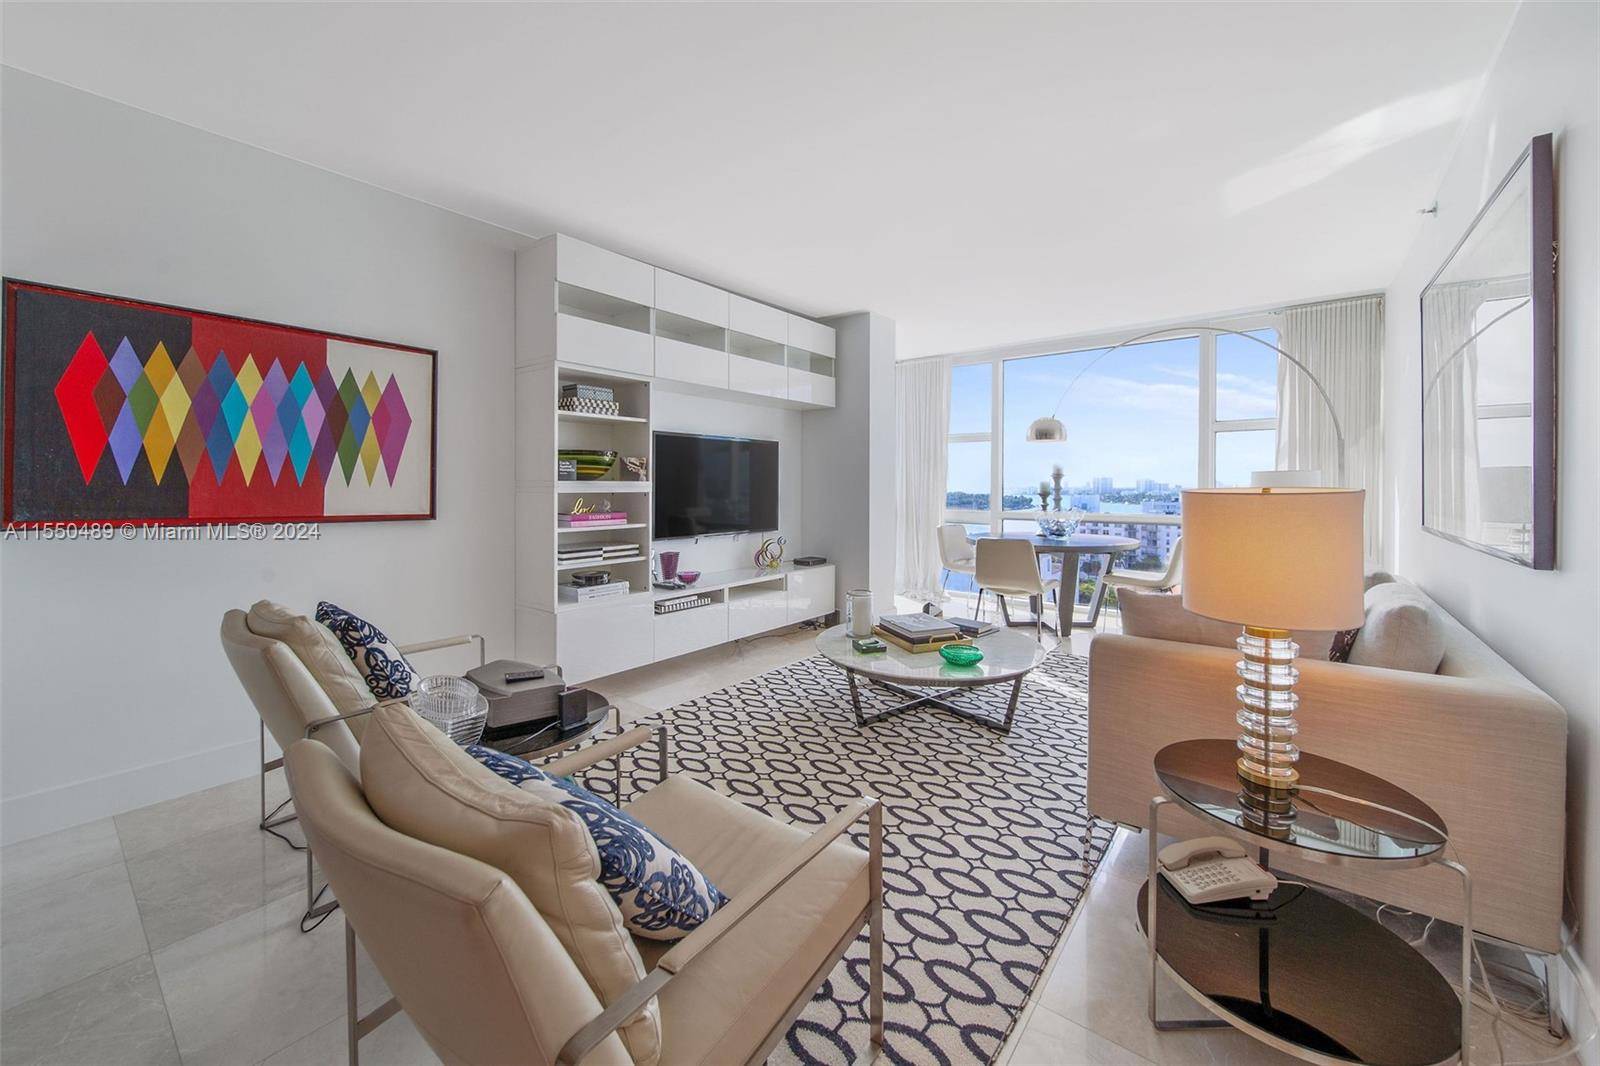 Rarely offered west facing corner spacious, beautifully furnished turn key unit with 2 large bedrooms, 2 zone A C in Center Tower at Carillon Miami Wellnes Resort, a premier oceanfront ...